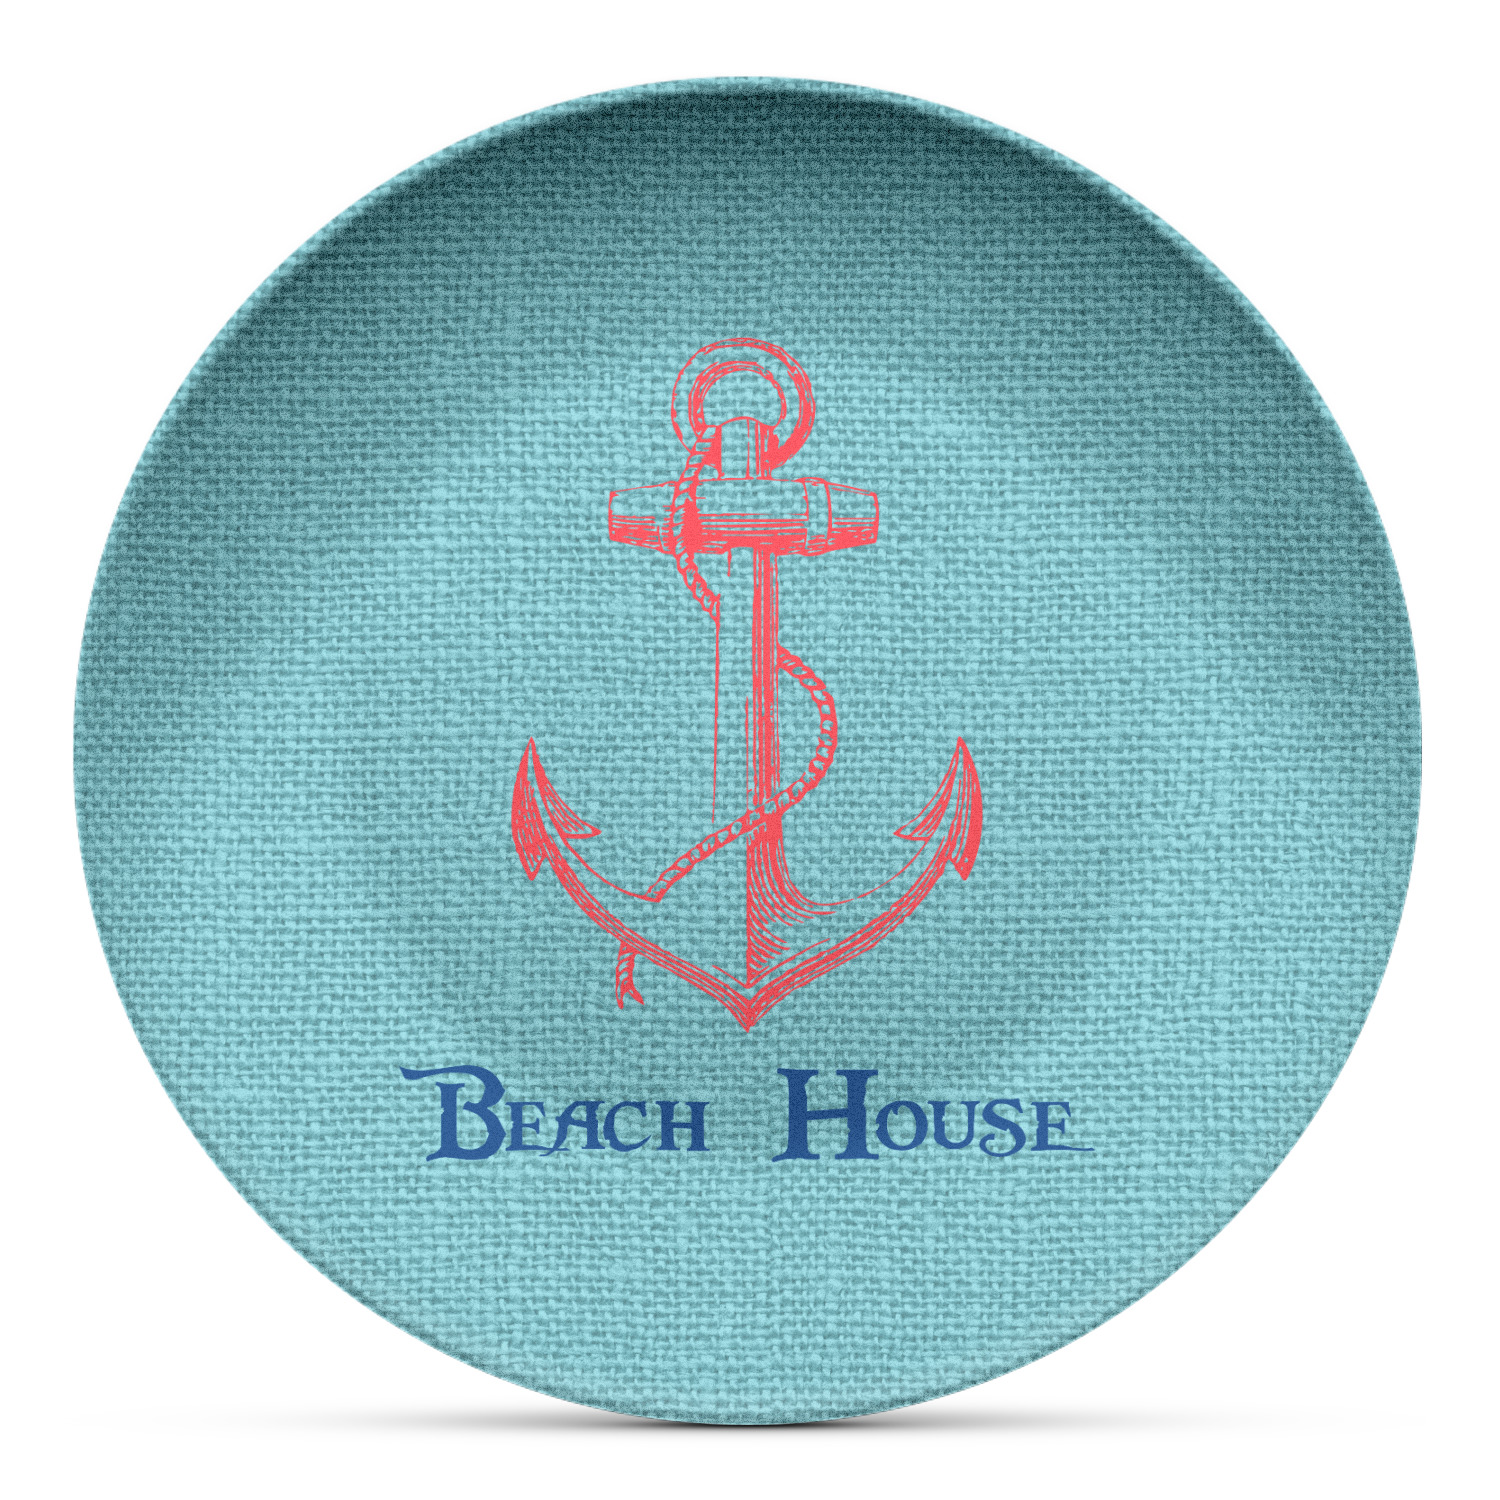 Chic Beach House Microwave Safe Plastic Plate - Composite Polymer